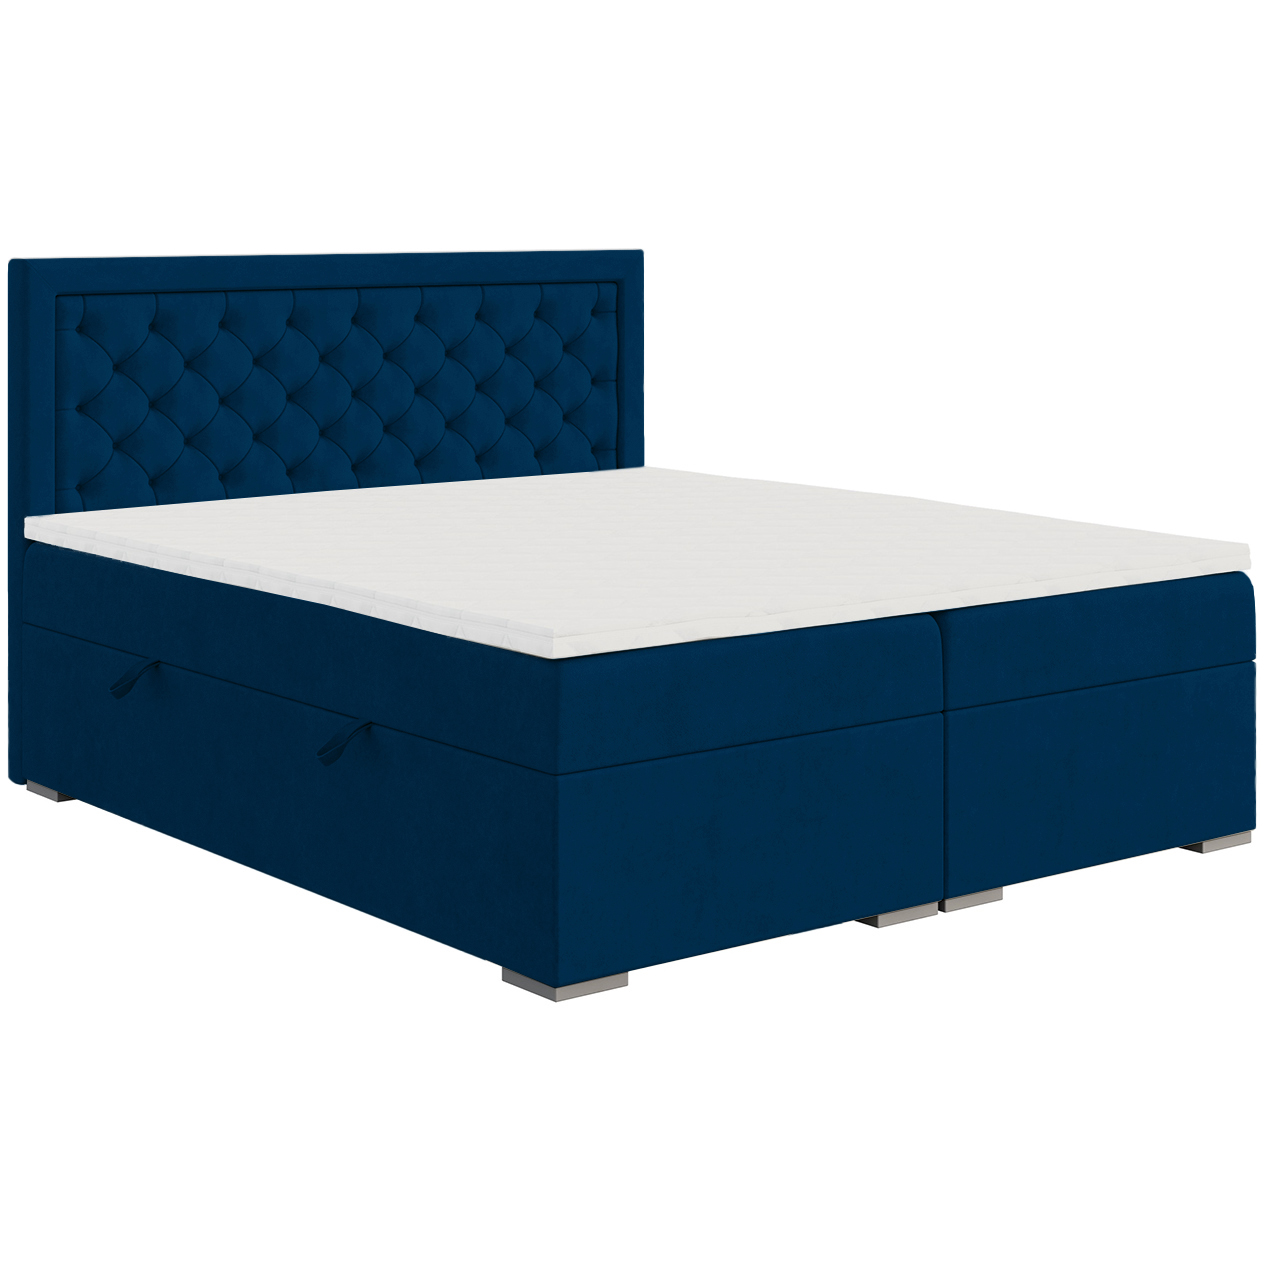 Upholstered bed BLUM 120x200 riviera 81